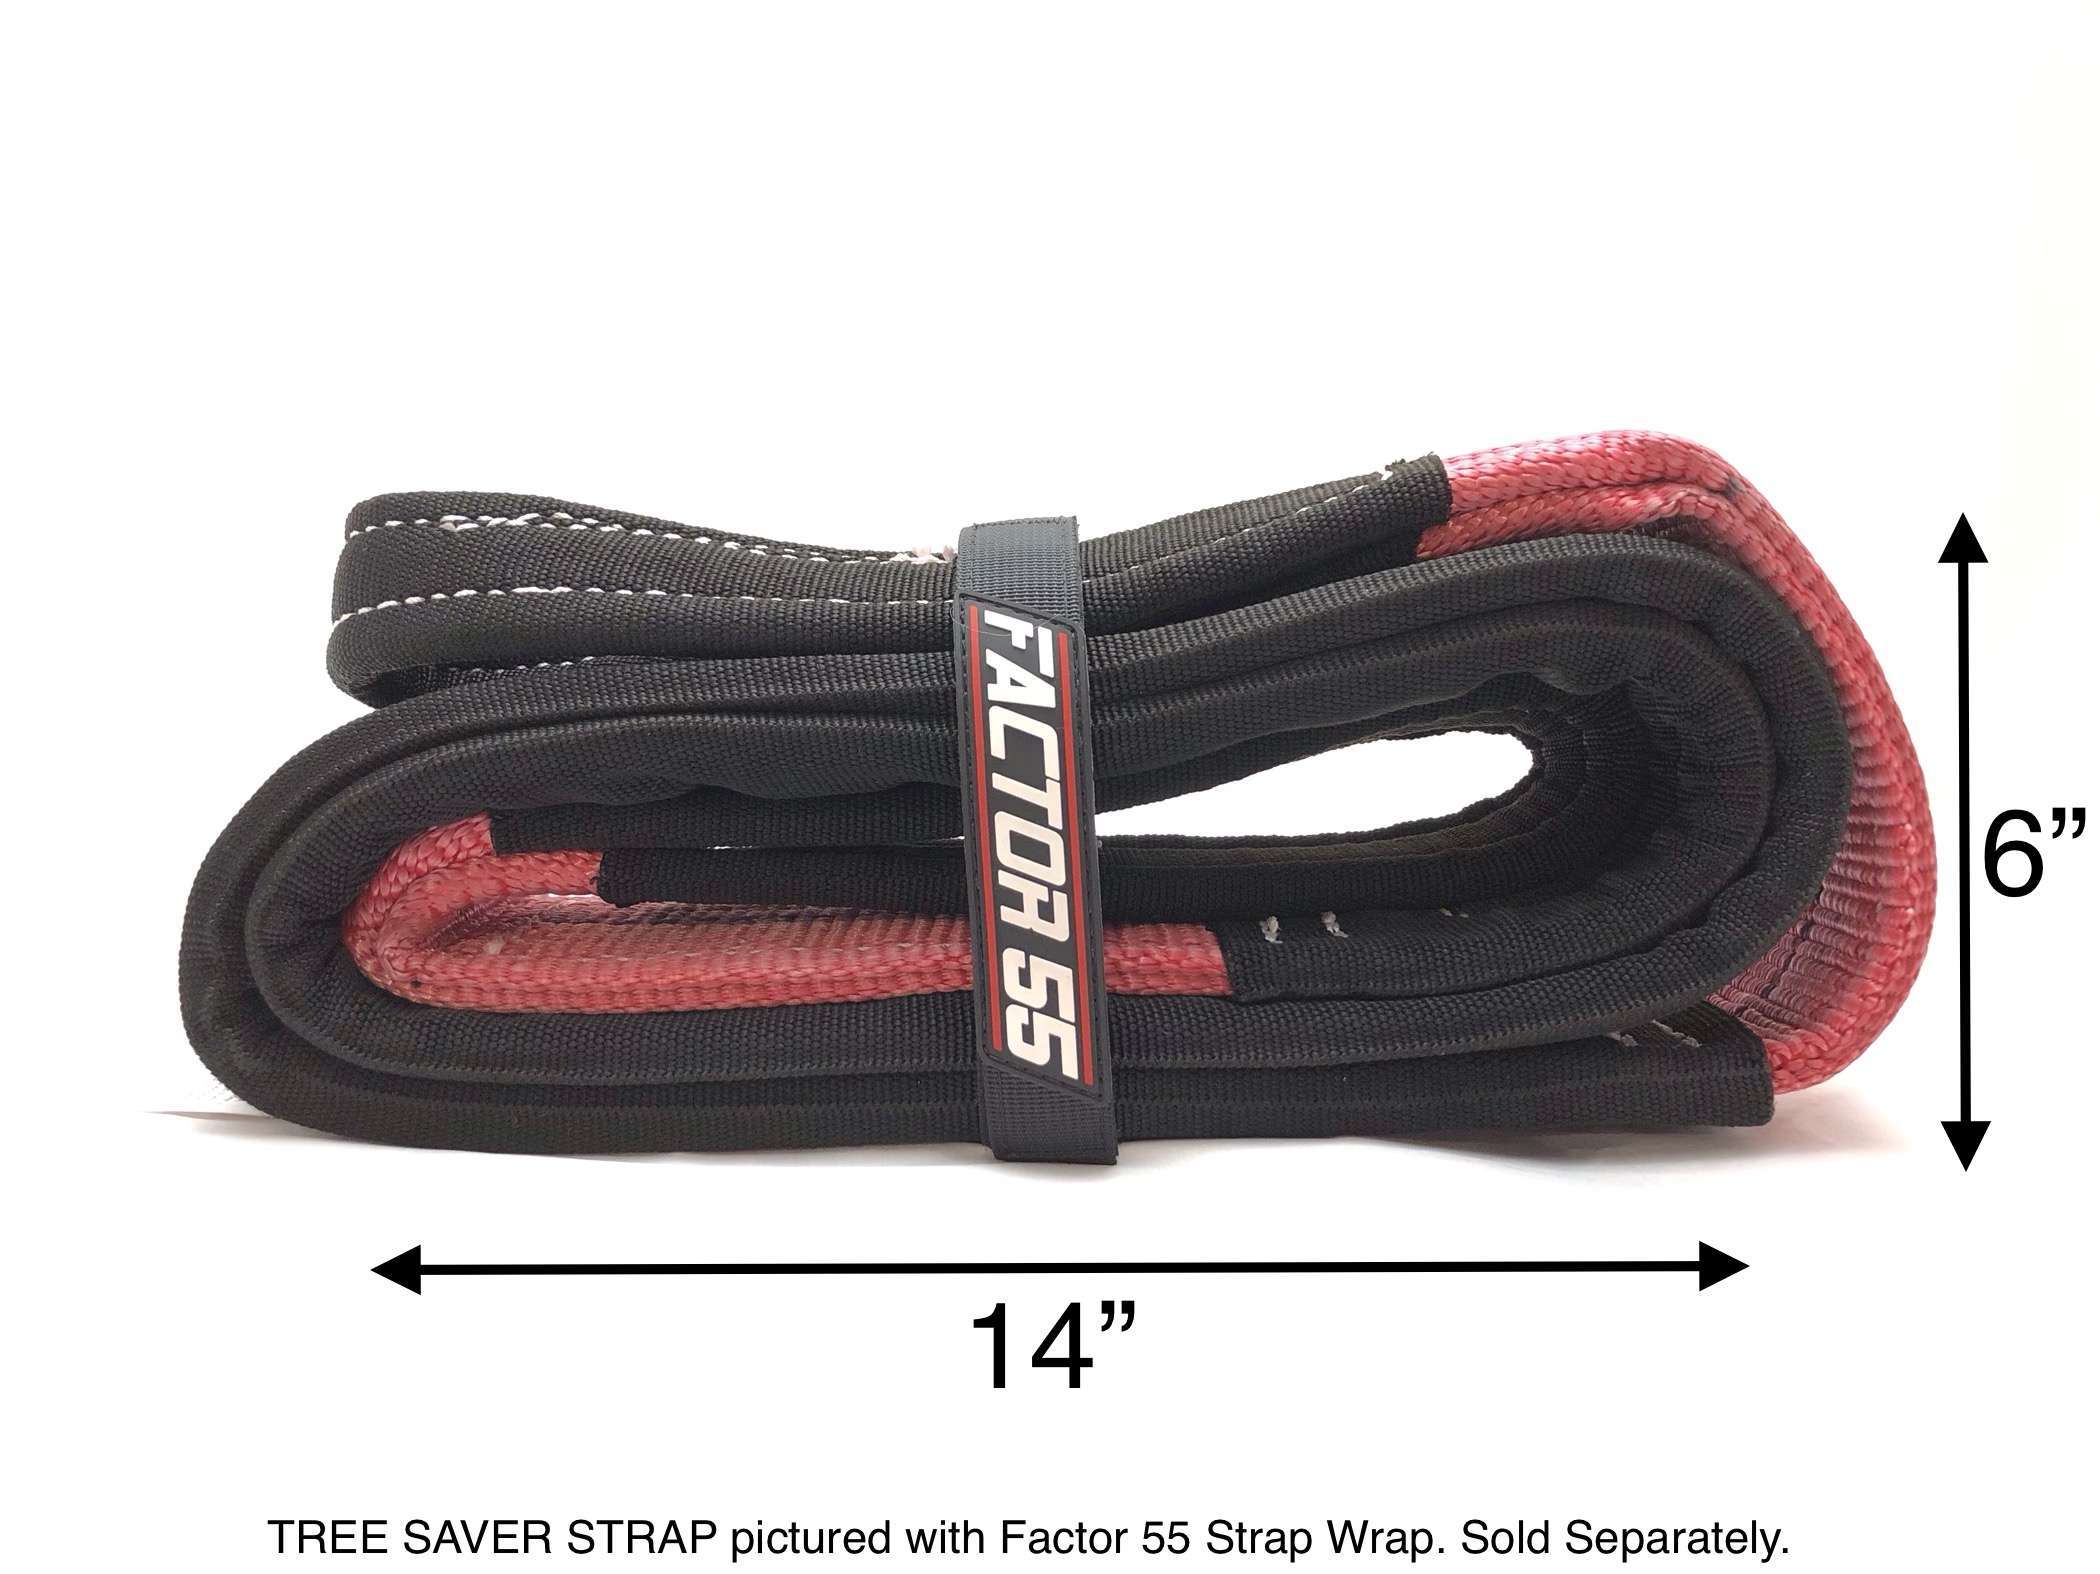 Tree Saver Strap Recovery Accessories Factor 55 design